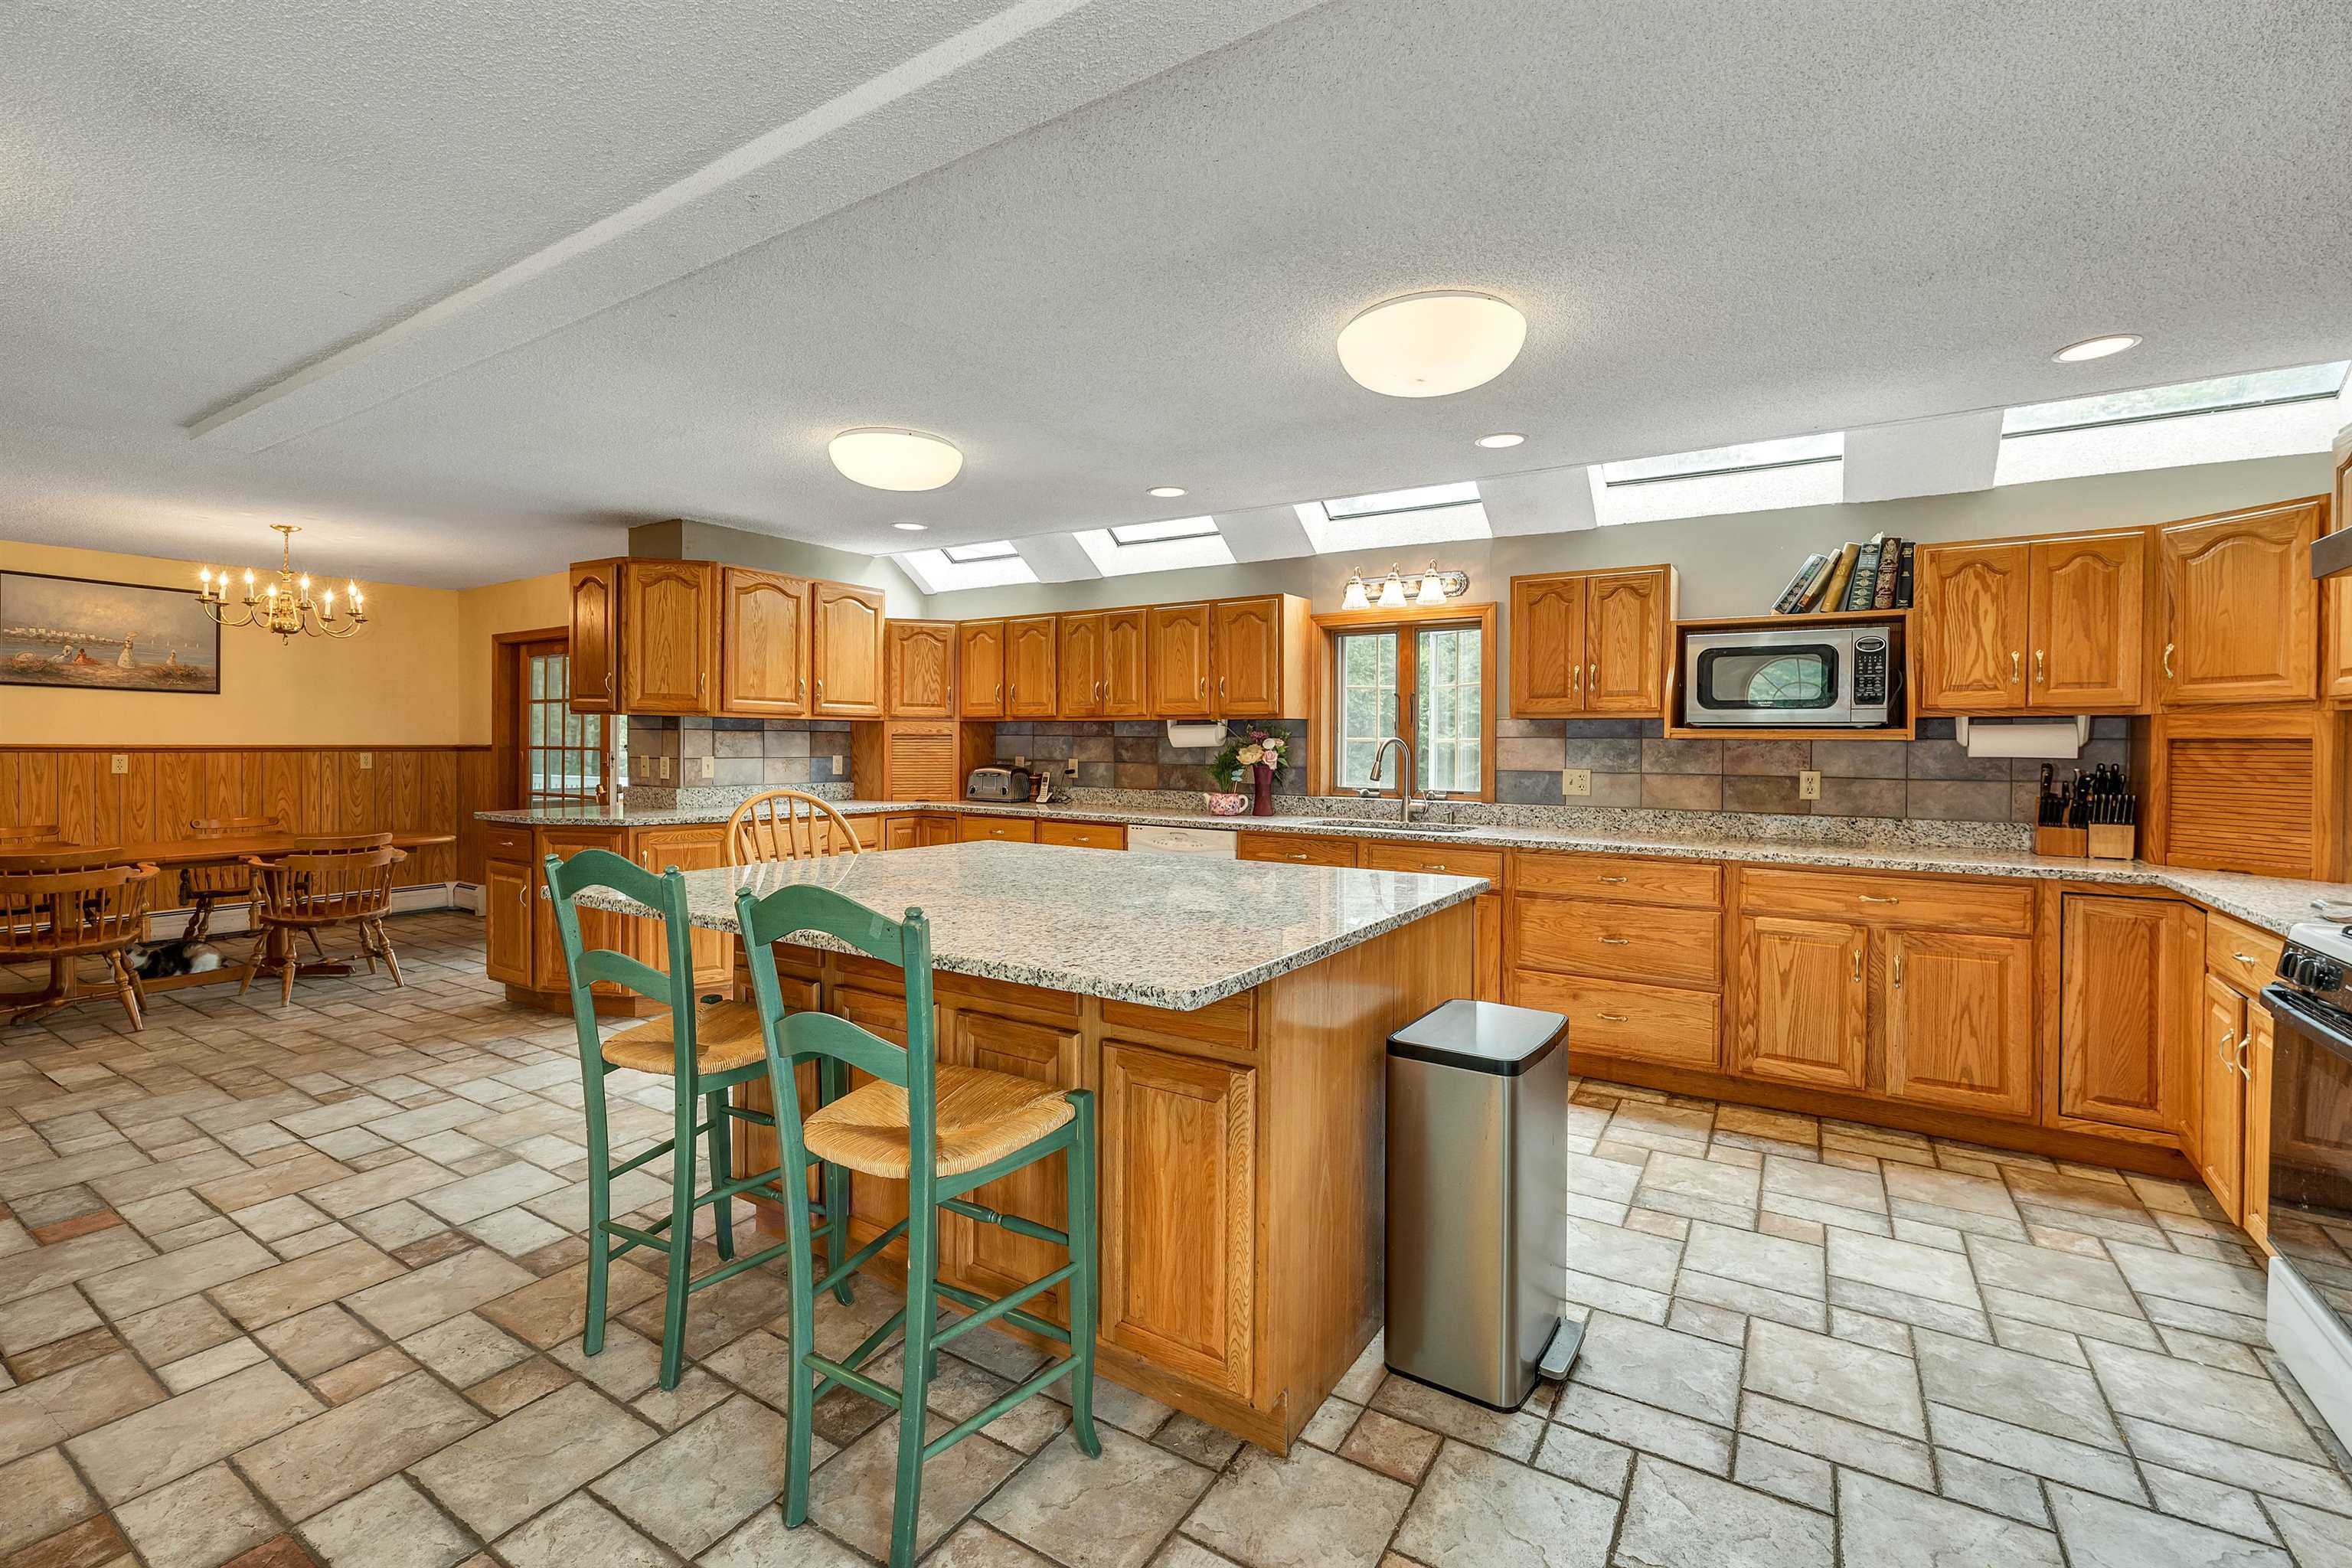 Granite island is also perfect as a serving area as well as a big cooking space.. This kitchen has served party meals for over 100 people.